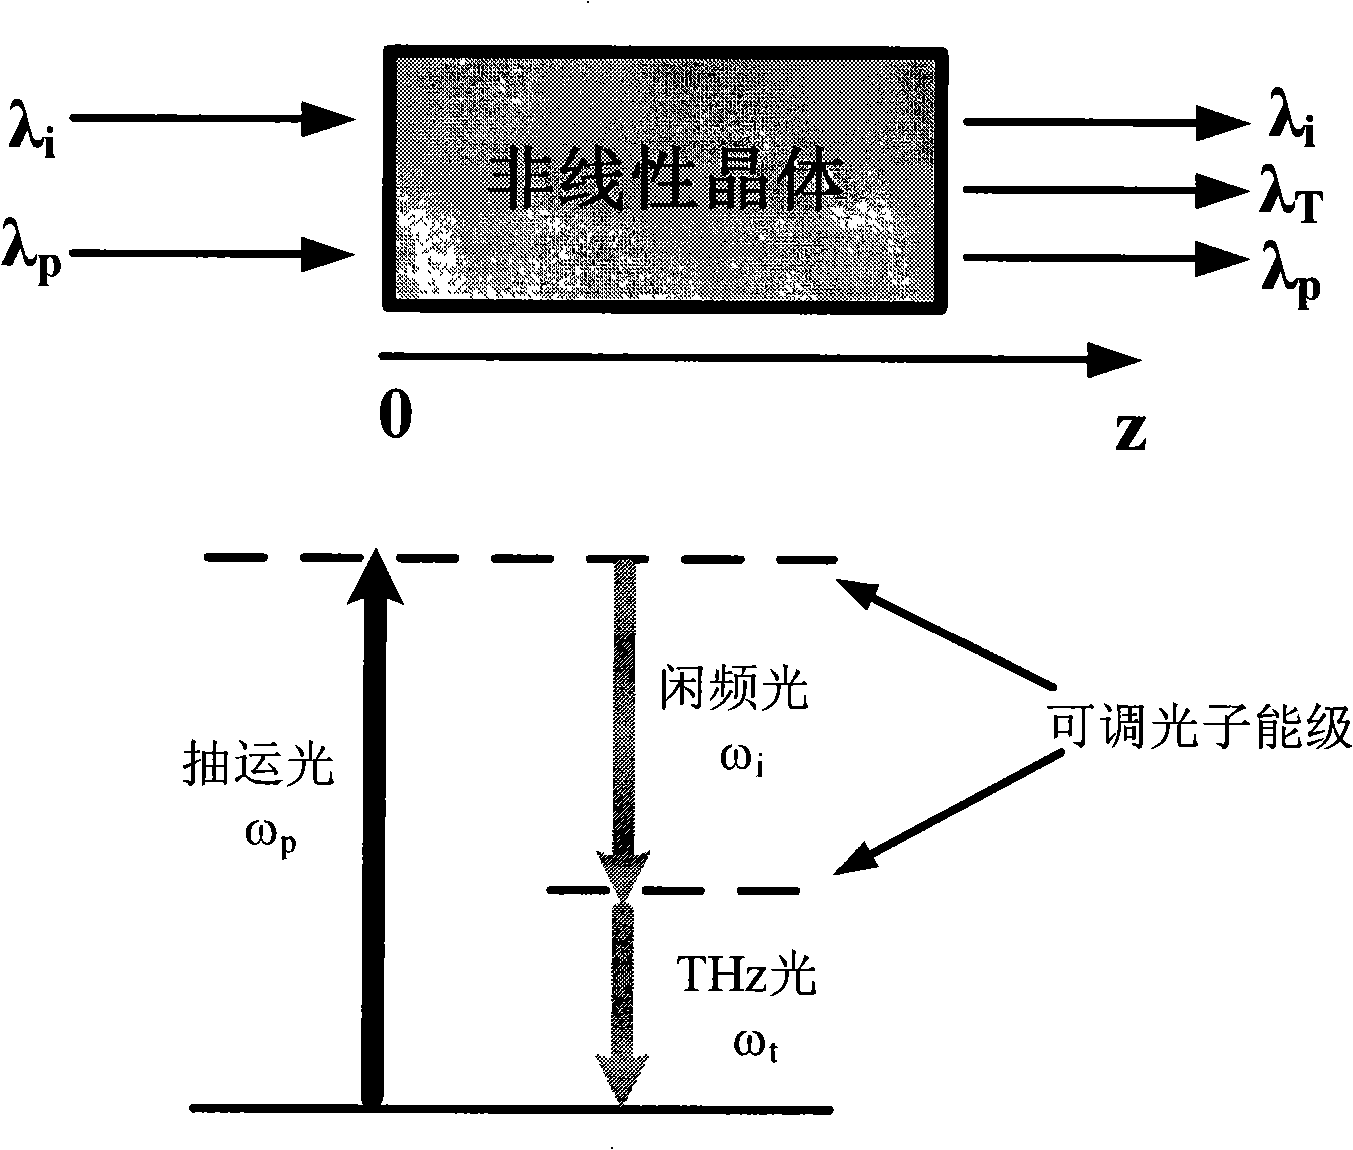 Apparatus for generating tunable narrow band terahertz band wave by optical difference frequency